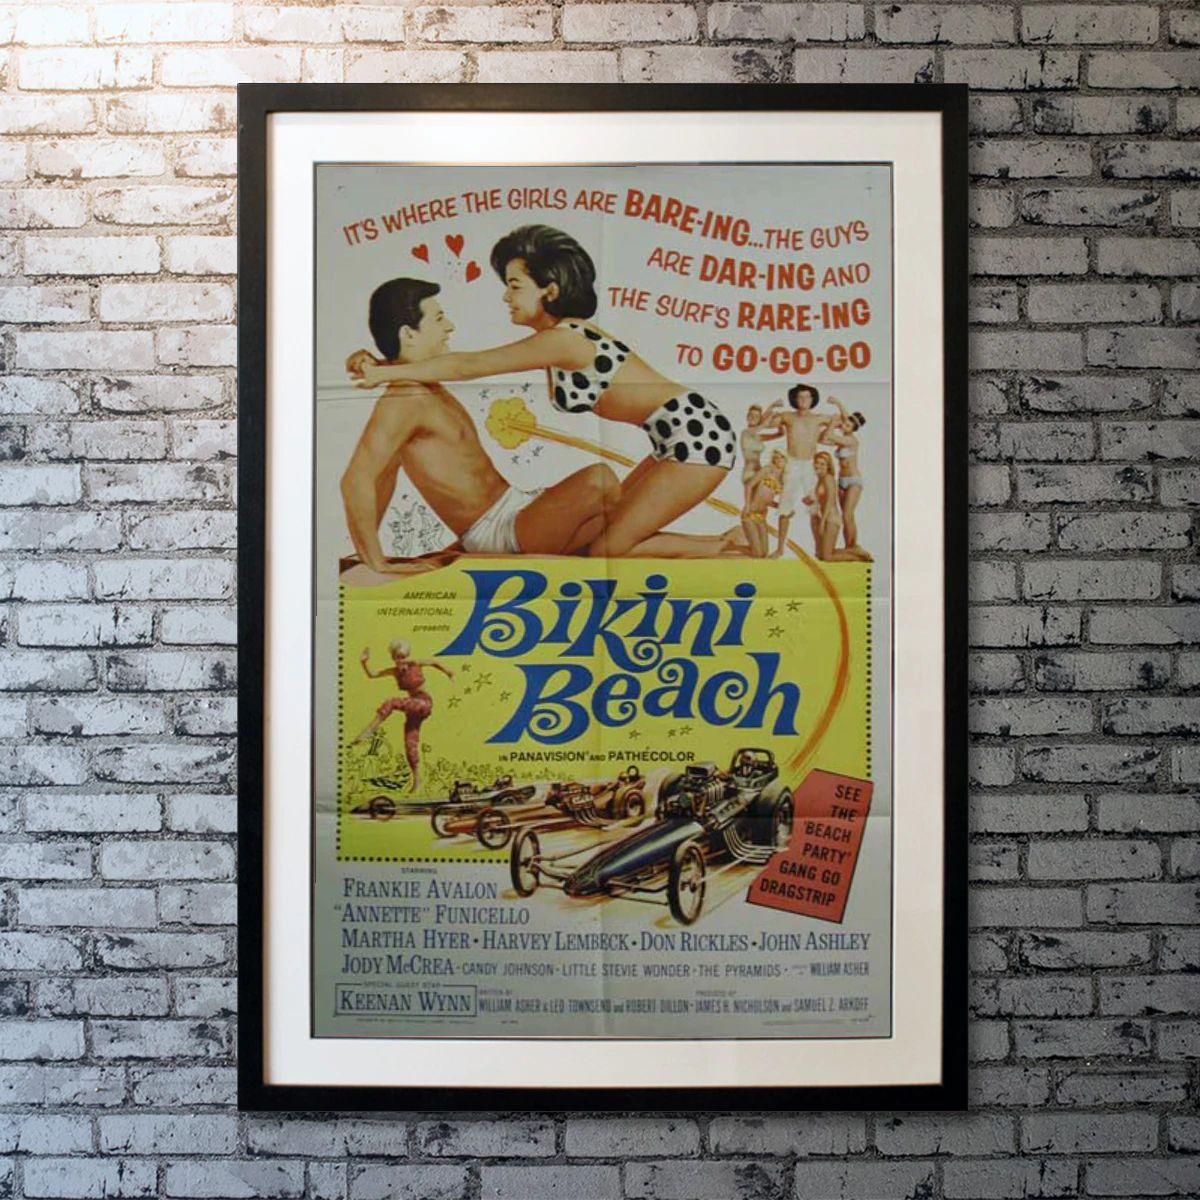 Bikini Beach, Unframed Poster, 1964

Original One Sheet (27 X 41 Inches). A millionaire sets out to prove his theory that his pet chimpanzee is as intelligent as the teenagers who hang out on the local beach, where he is intending to build a